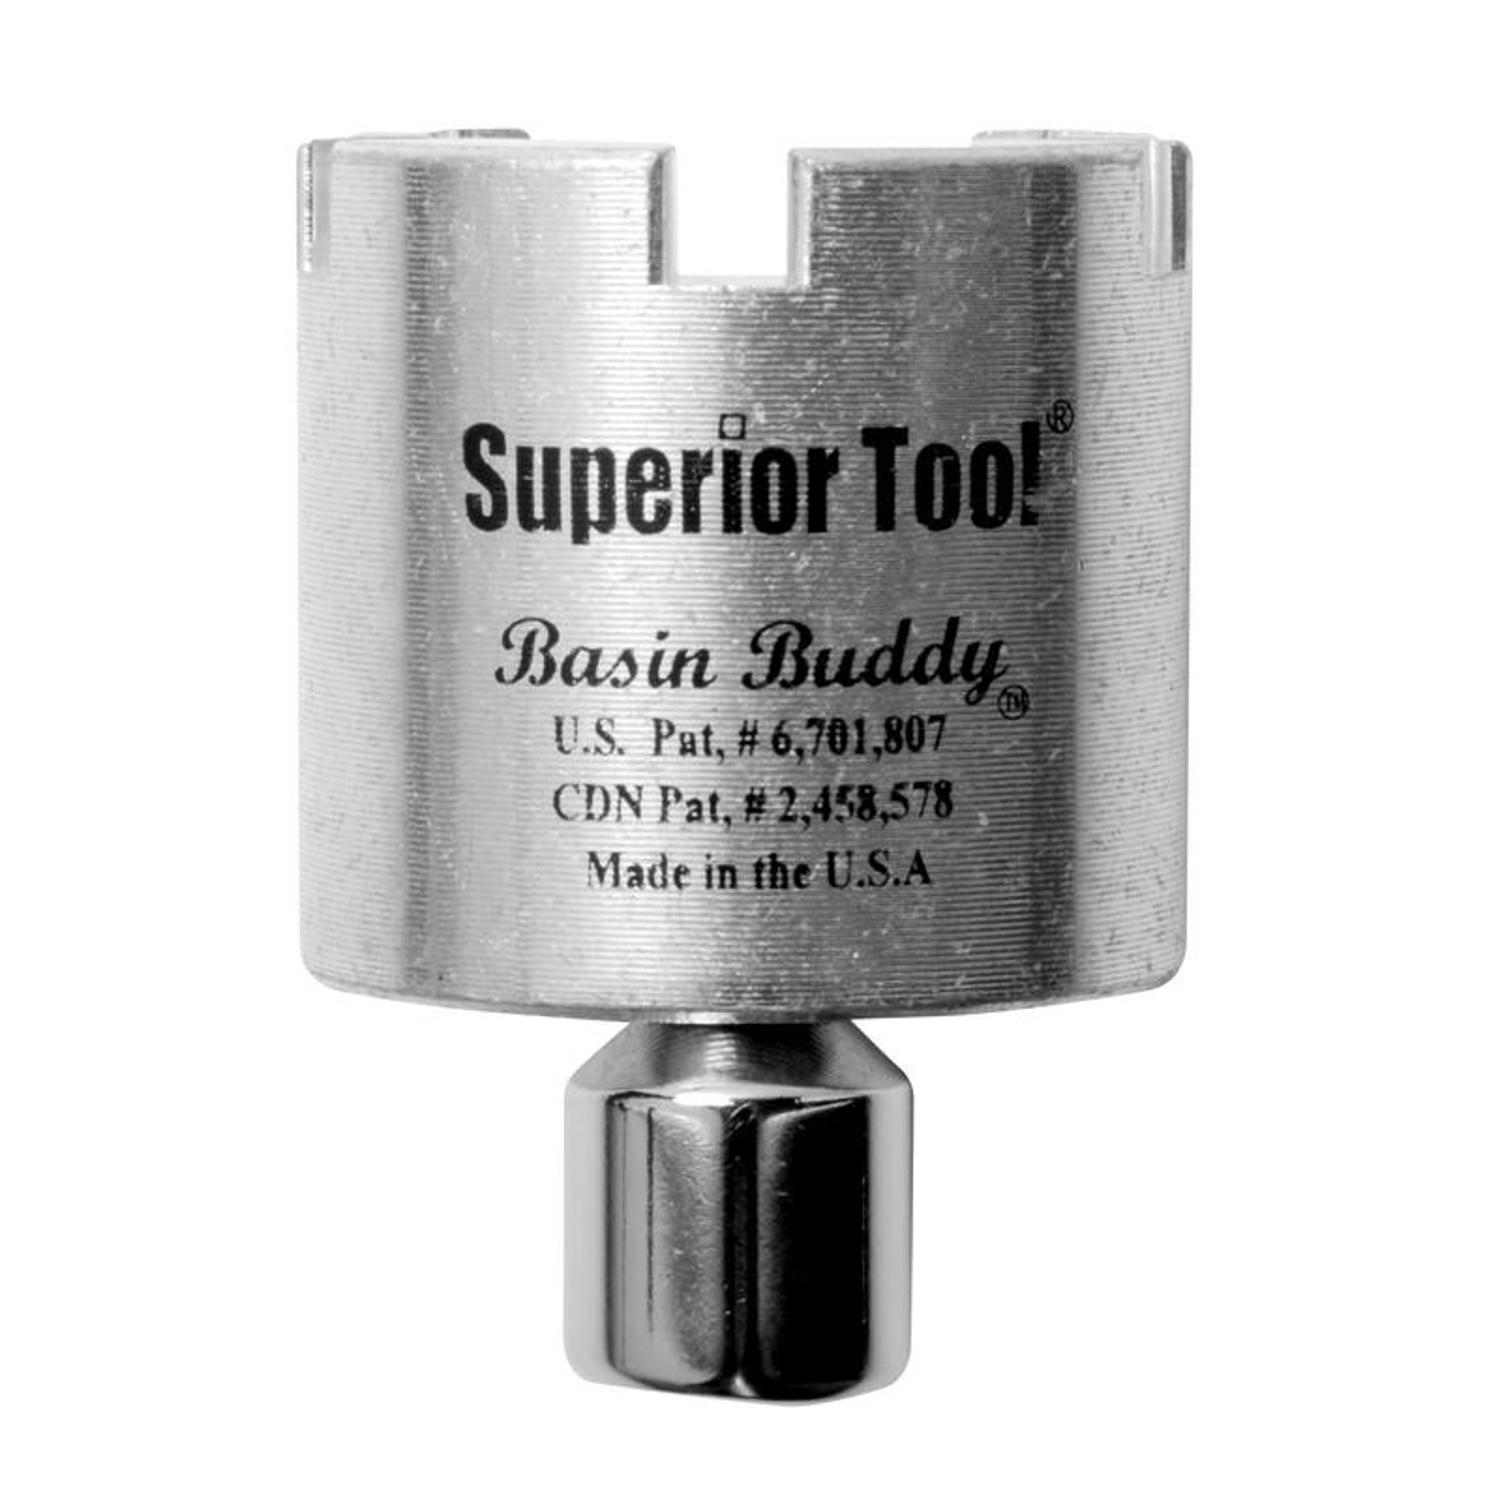 Superior Tool 05255 1.5 Tub Drain Extractor-Removes One and a Half Inch  Old or Stubborn Tub Drains